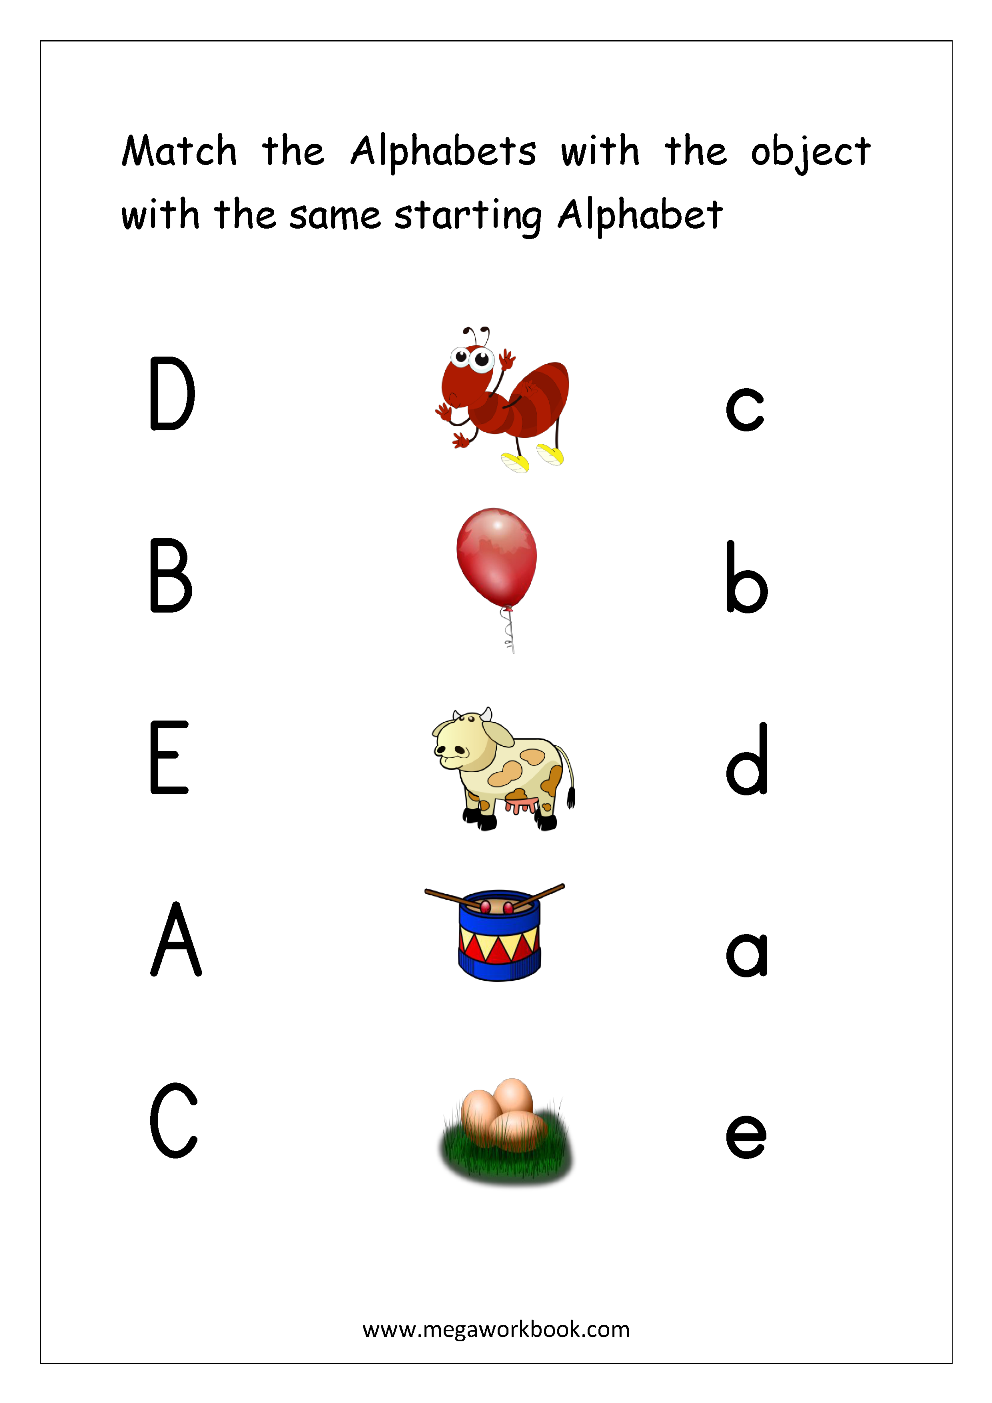 matching-letters-with-pictures-worksheets-educational-activity-for-children-puzzles-for-kids